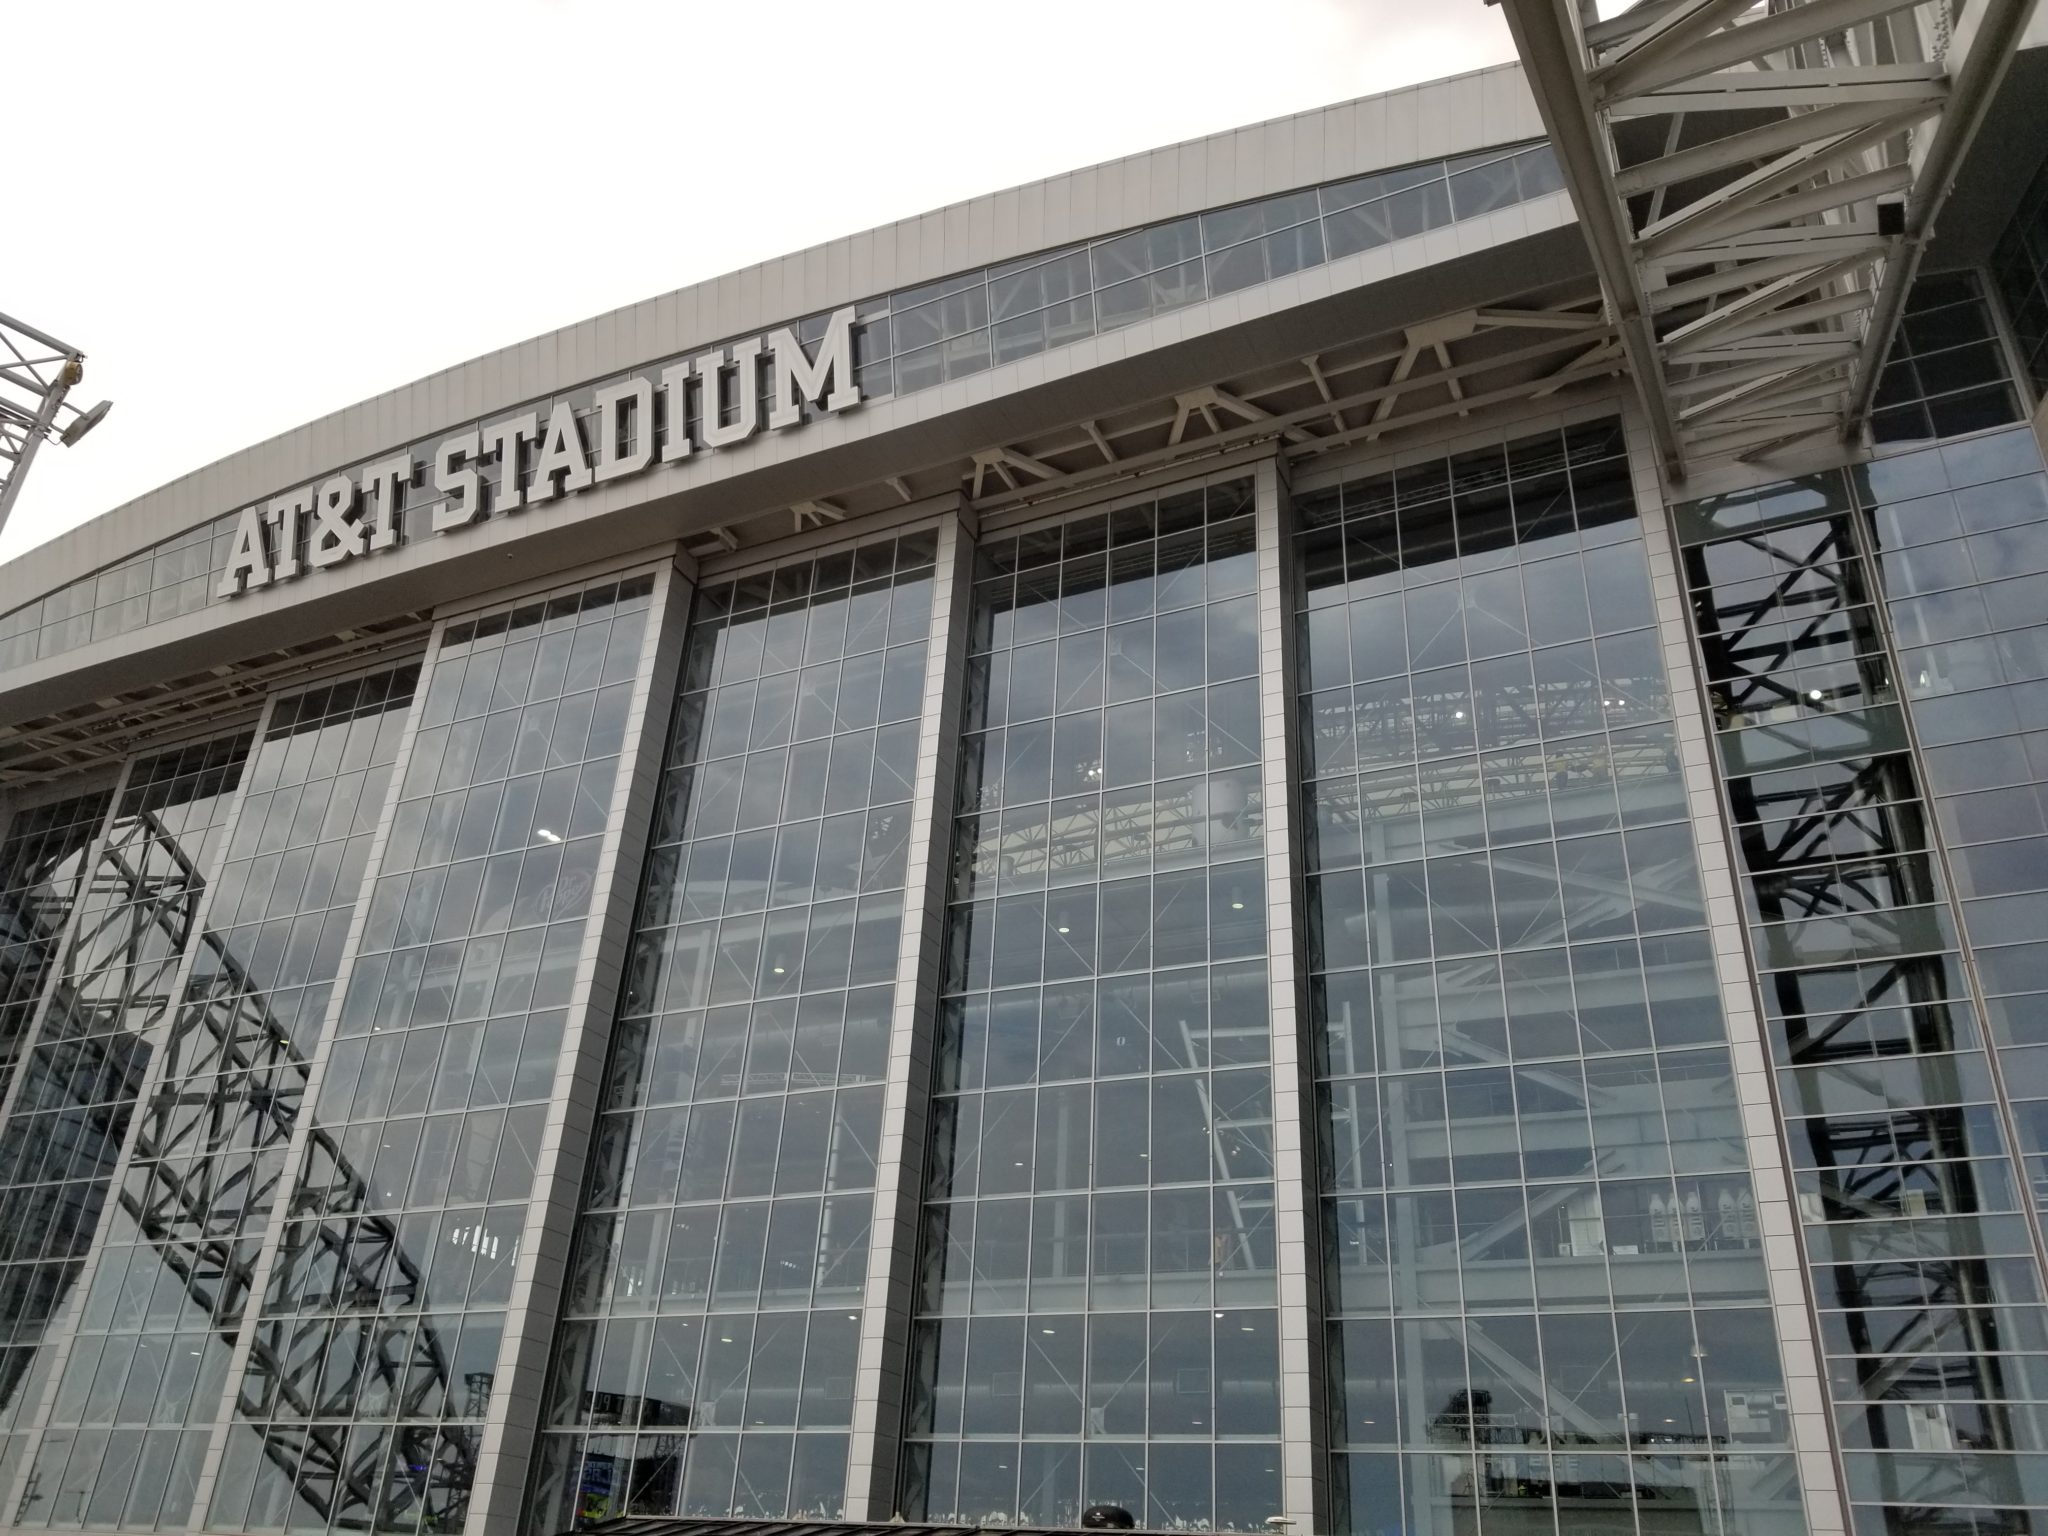 a large stadium with a large metal structure